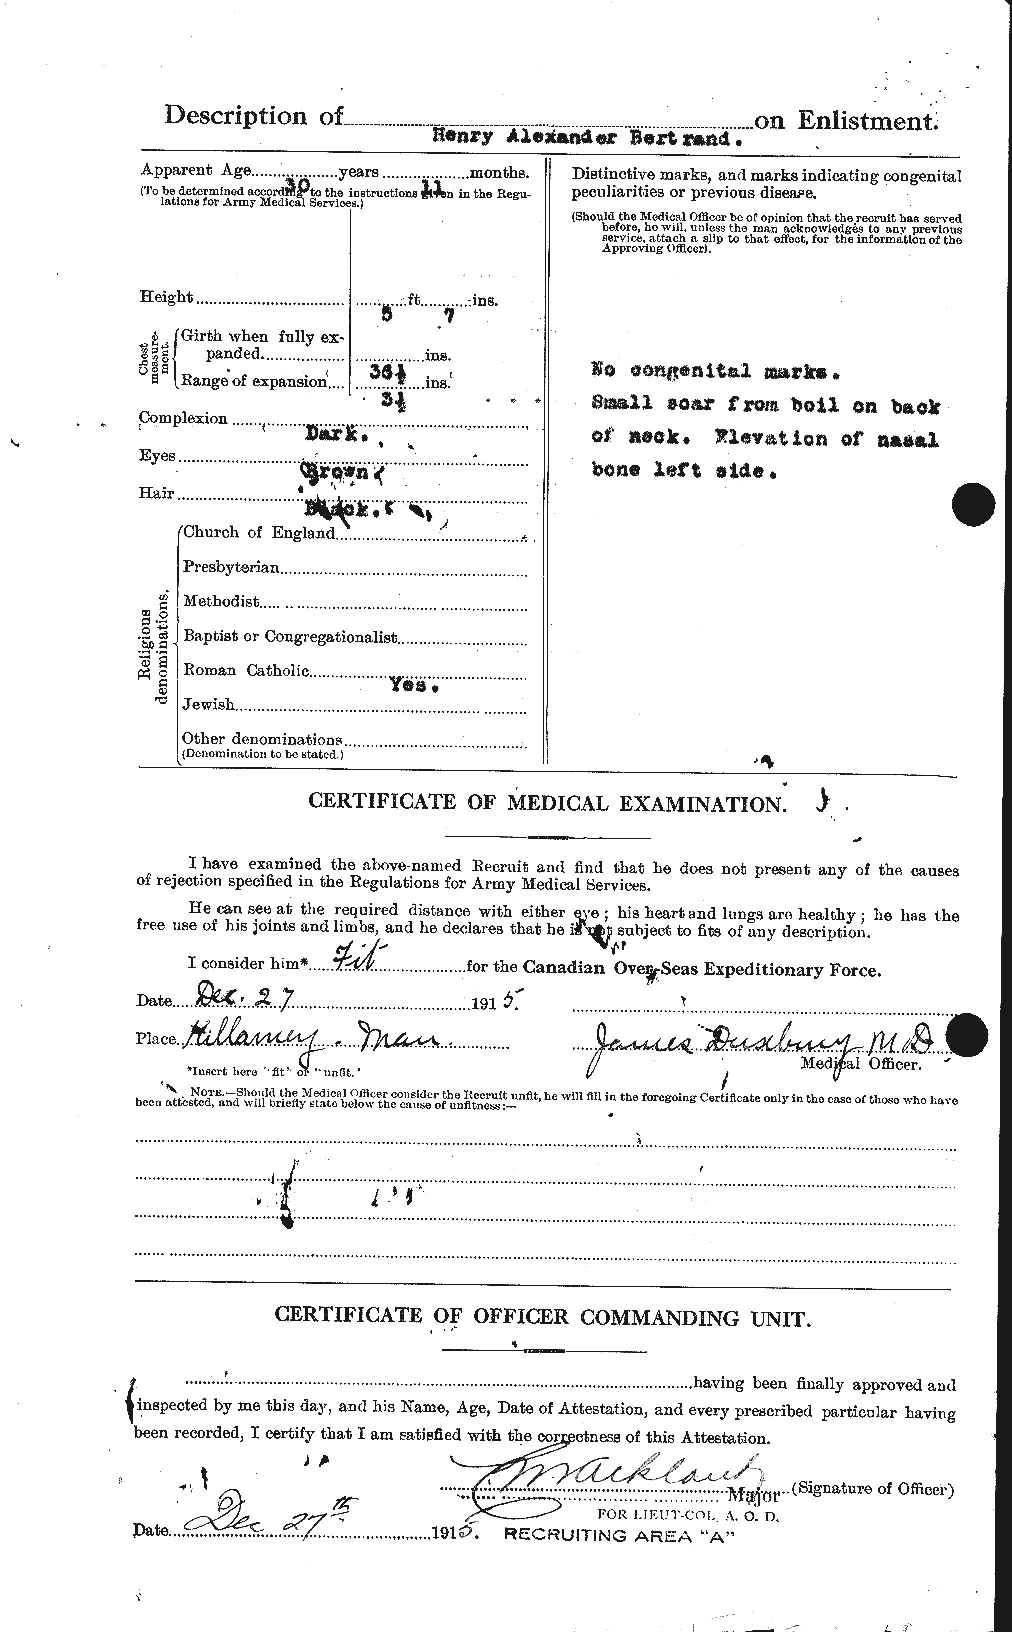 Personnel Records of the First World War - CEF 238779b